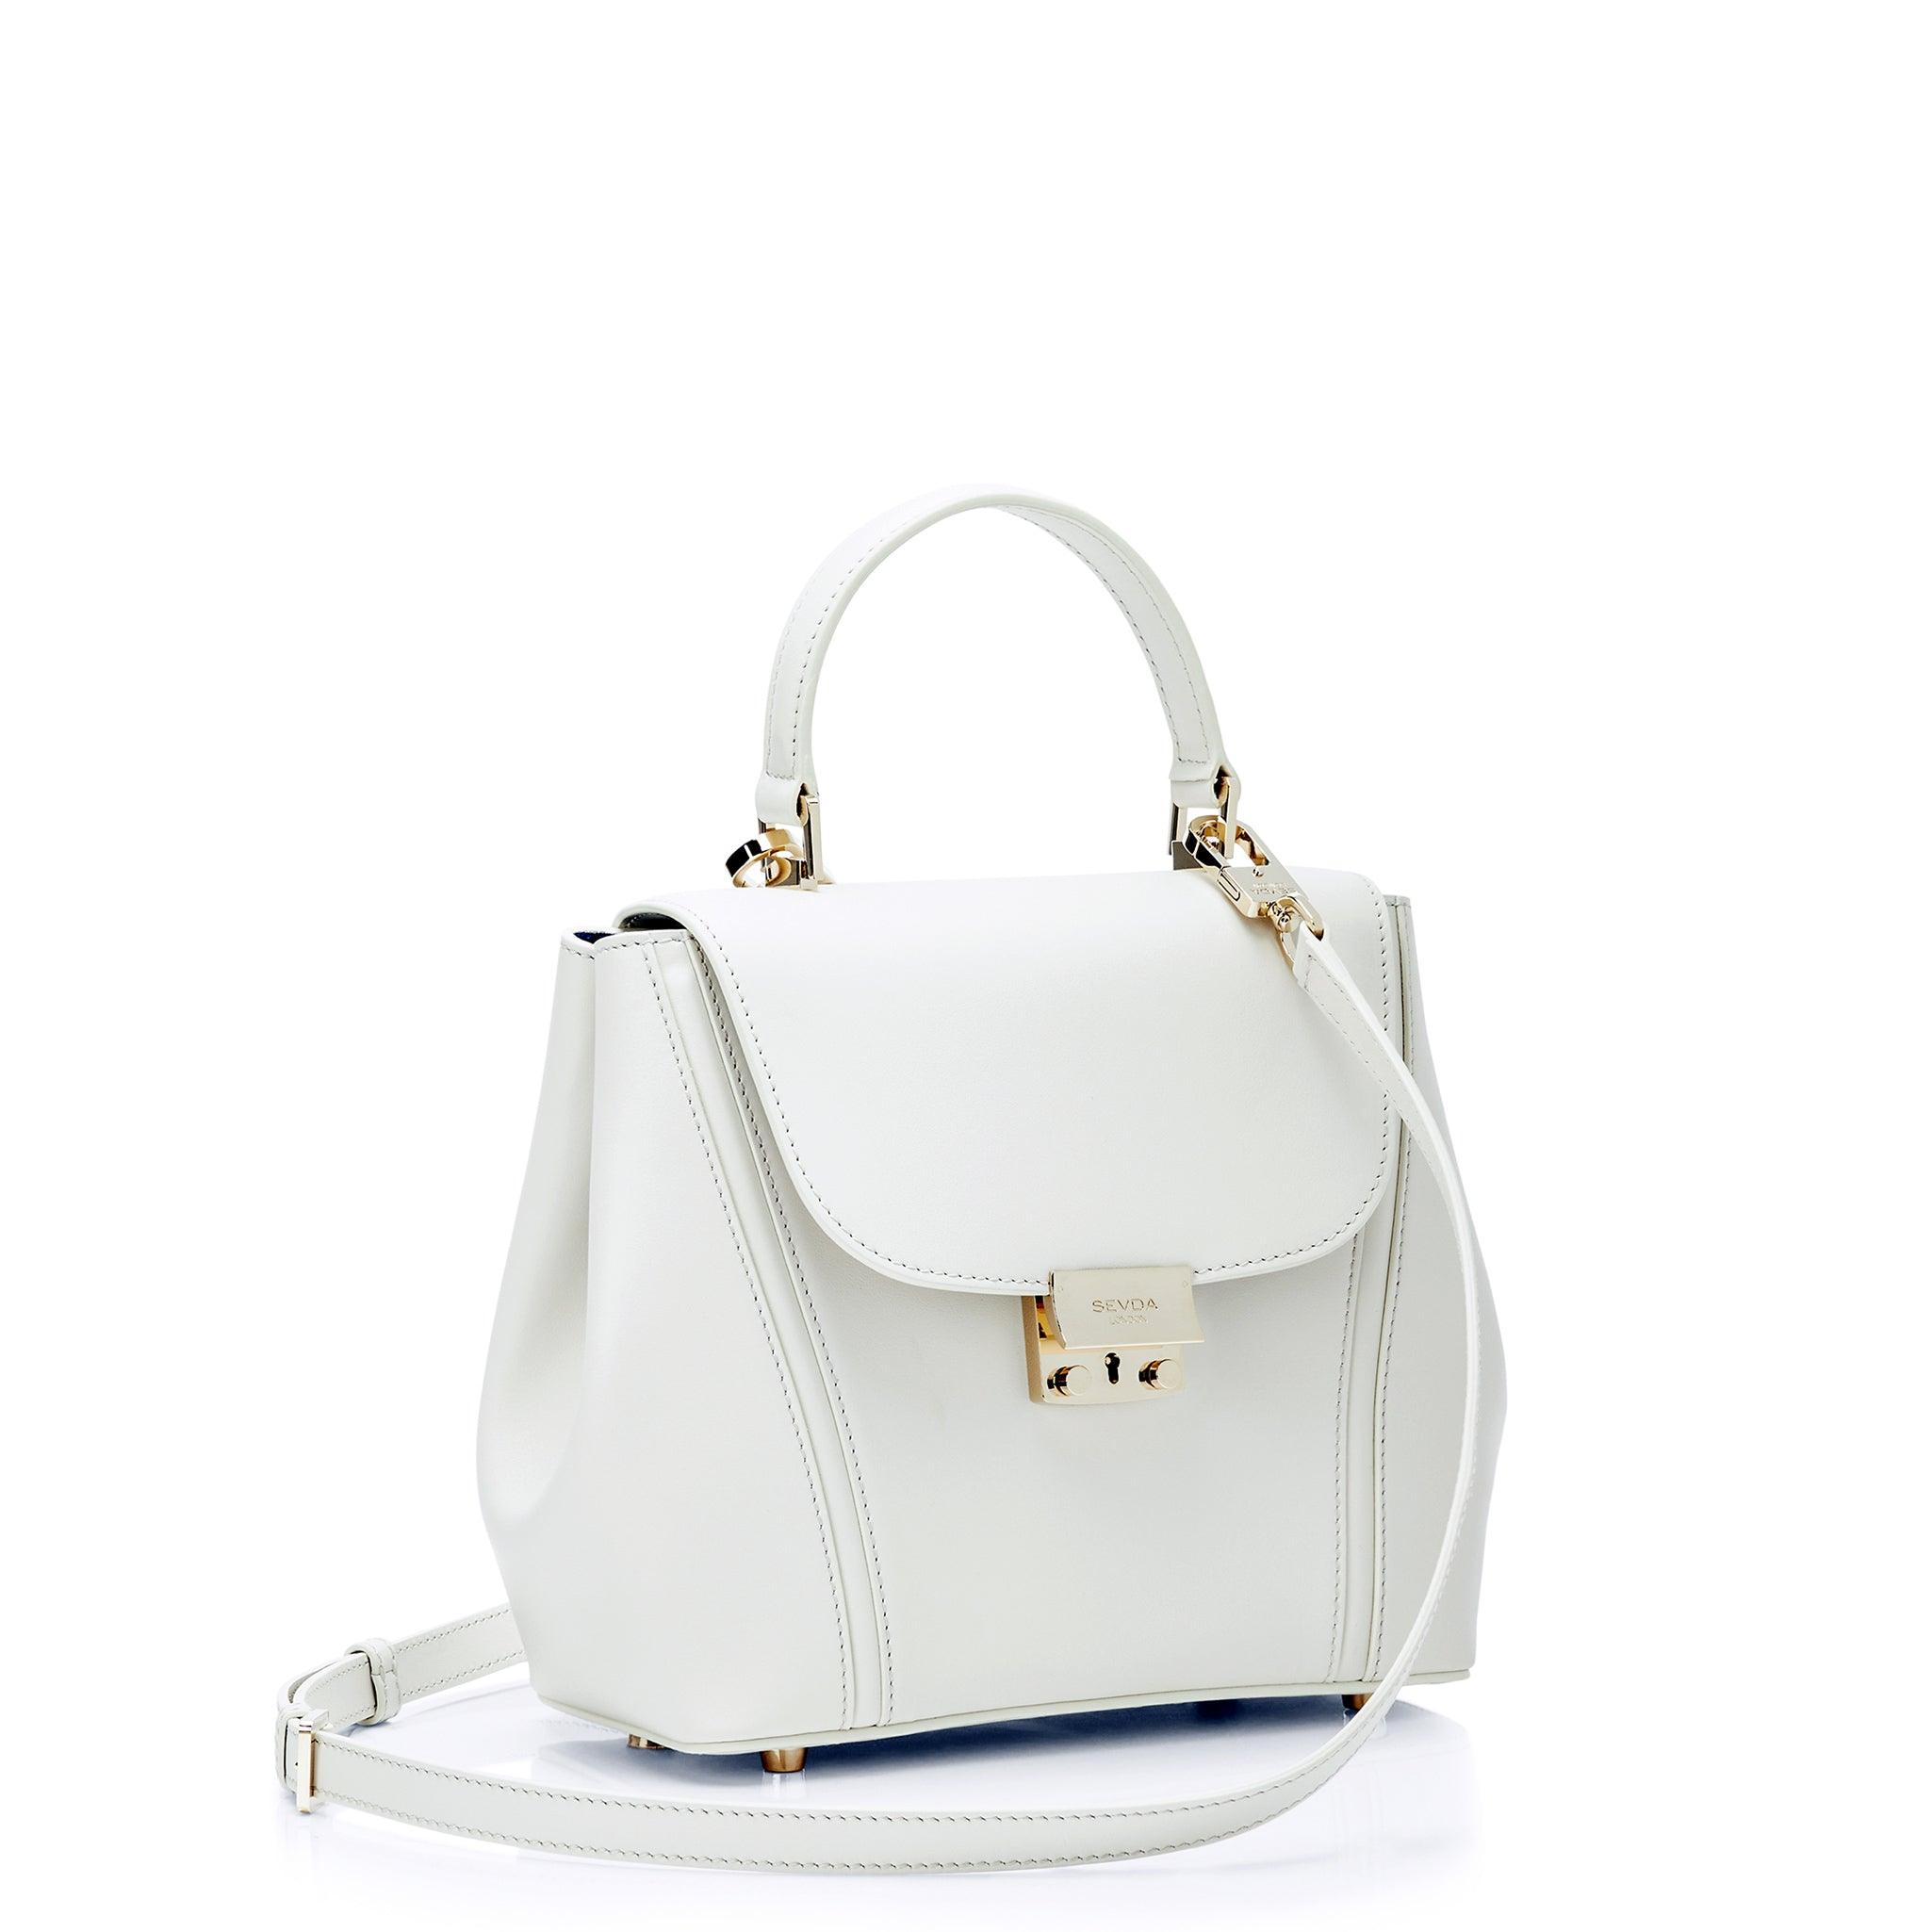 Off White Small Top Handle Designer Bag - A fusion of London design and Italian craftsmanship.